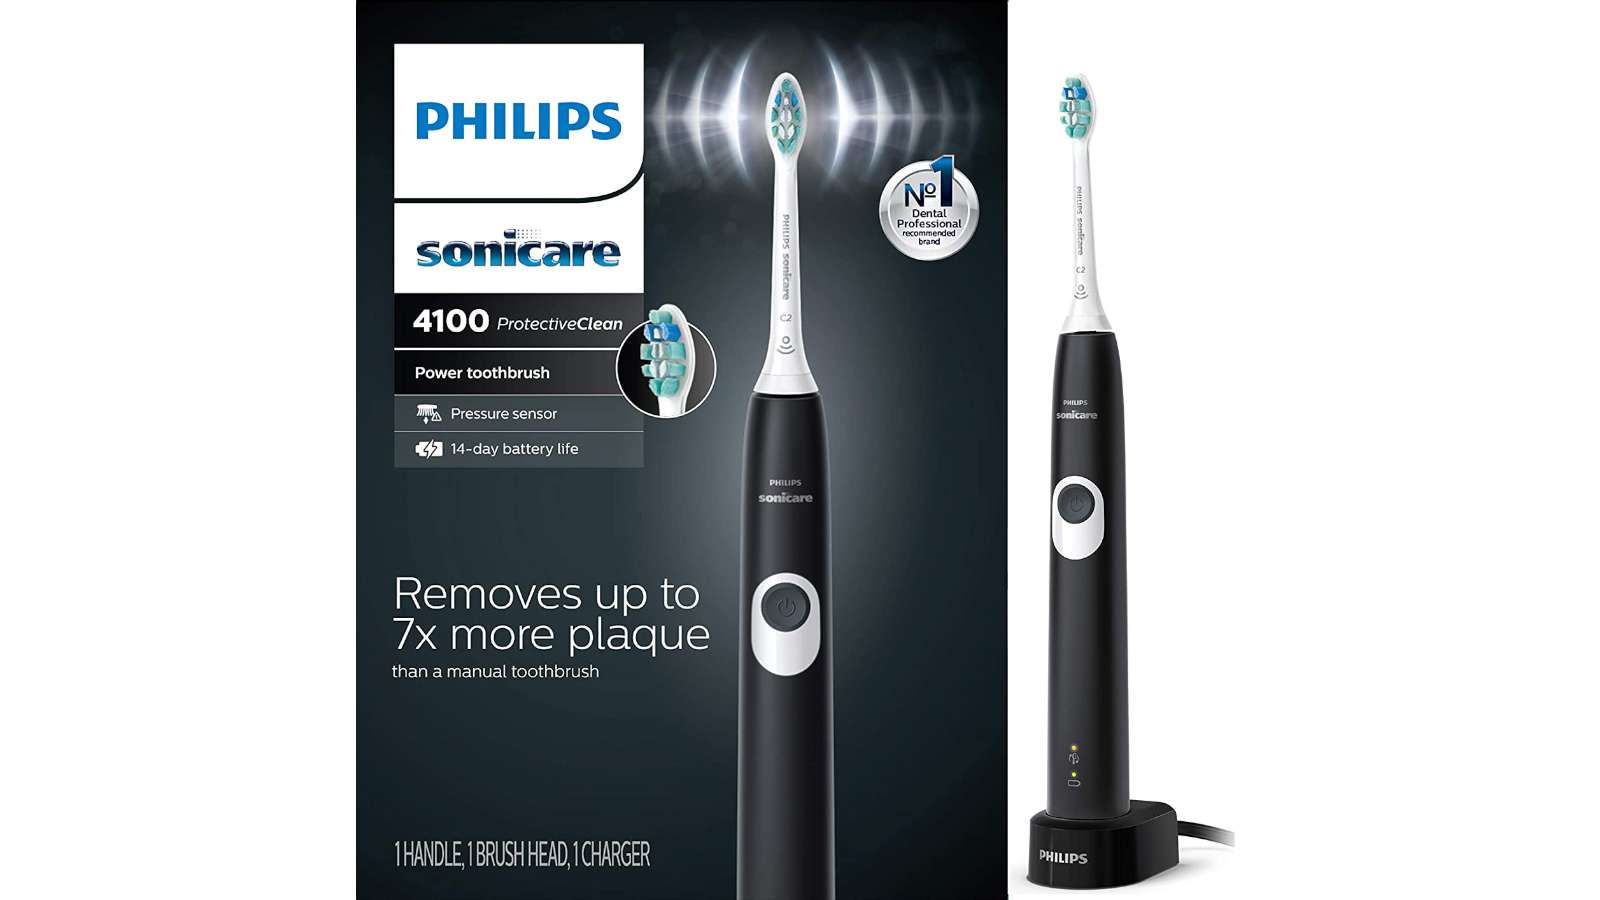 Review of Philips Sonicare 4100 - Philips Sonicare ProtectiveClean 4100 (Black, HX6810/50) toothbrush and its packaging